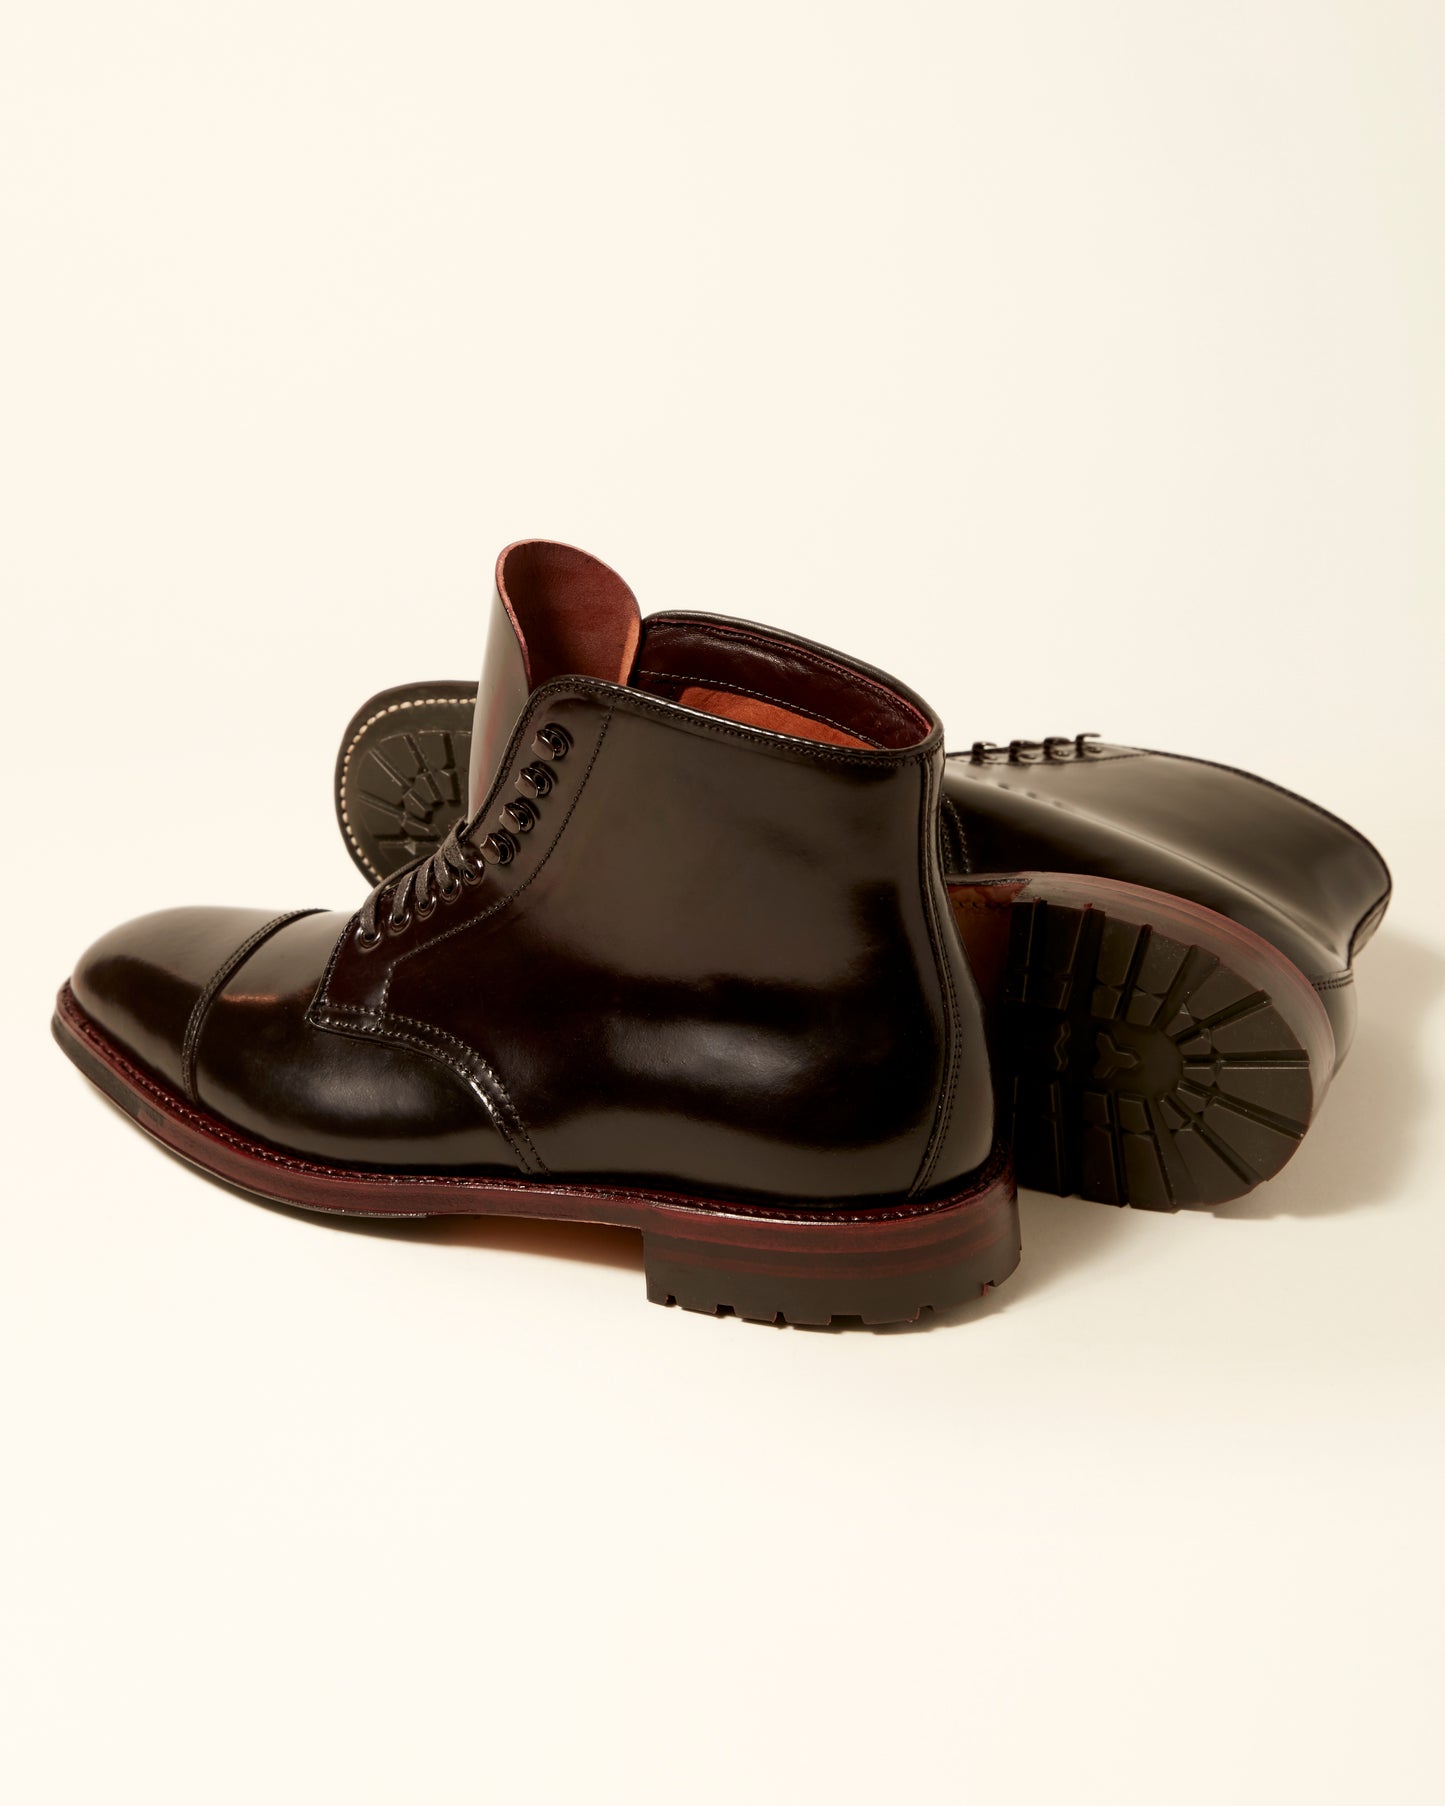 "Gallaway" Straight Tip Boot in Color 8 Shell Cordovan, Plaza Last